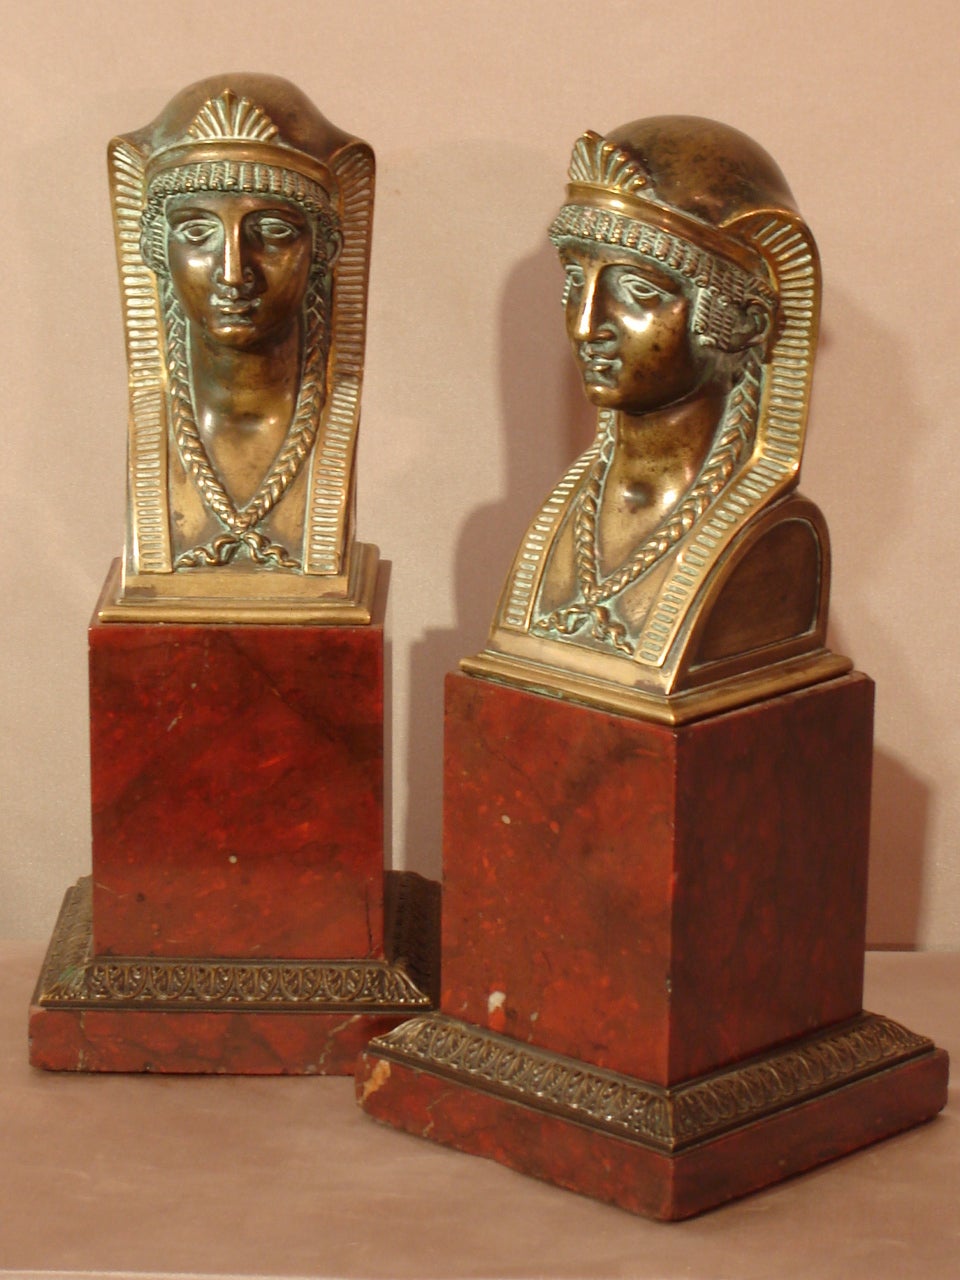 Attributed to Pierre- Philippe THOMIRE (1751-1843). Large pair of 'a l'Egyptienne' busts in gilded and patinated bronze. Paris. Empire period. 1800-1805. All resting on a cherry red marble rectangular base and a counter base also in cherry red